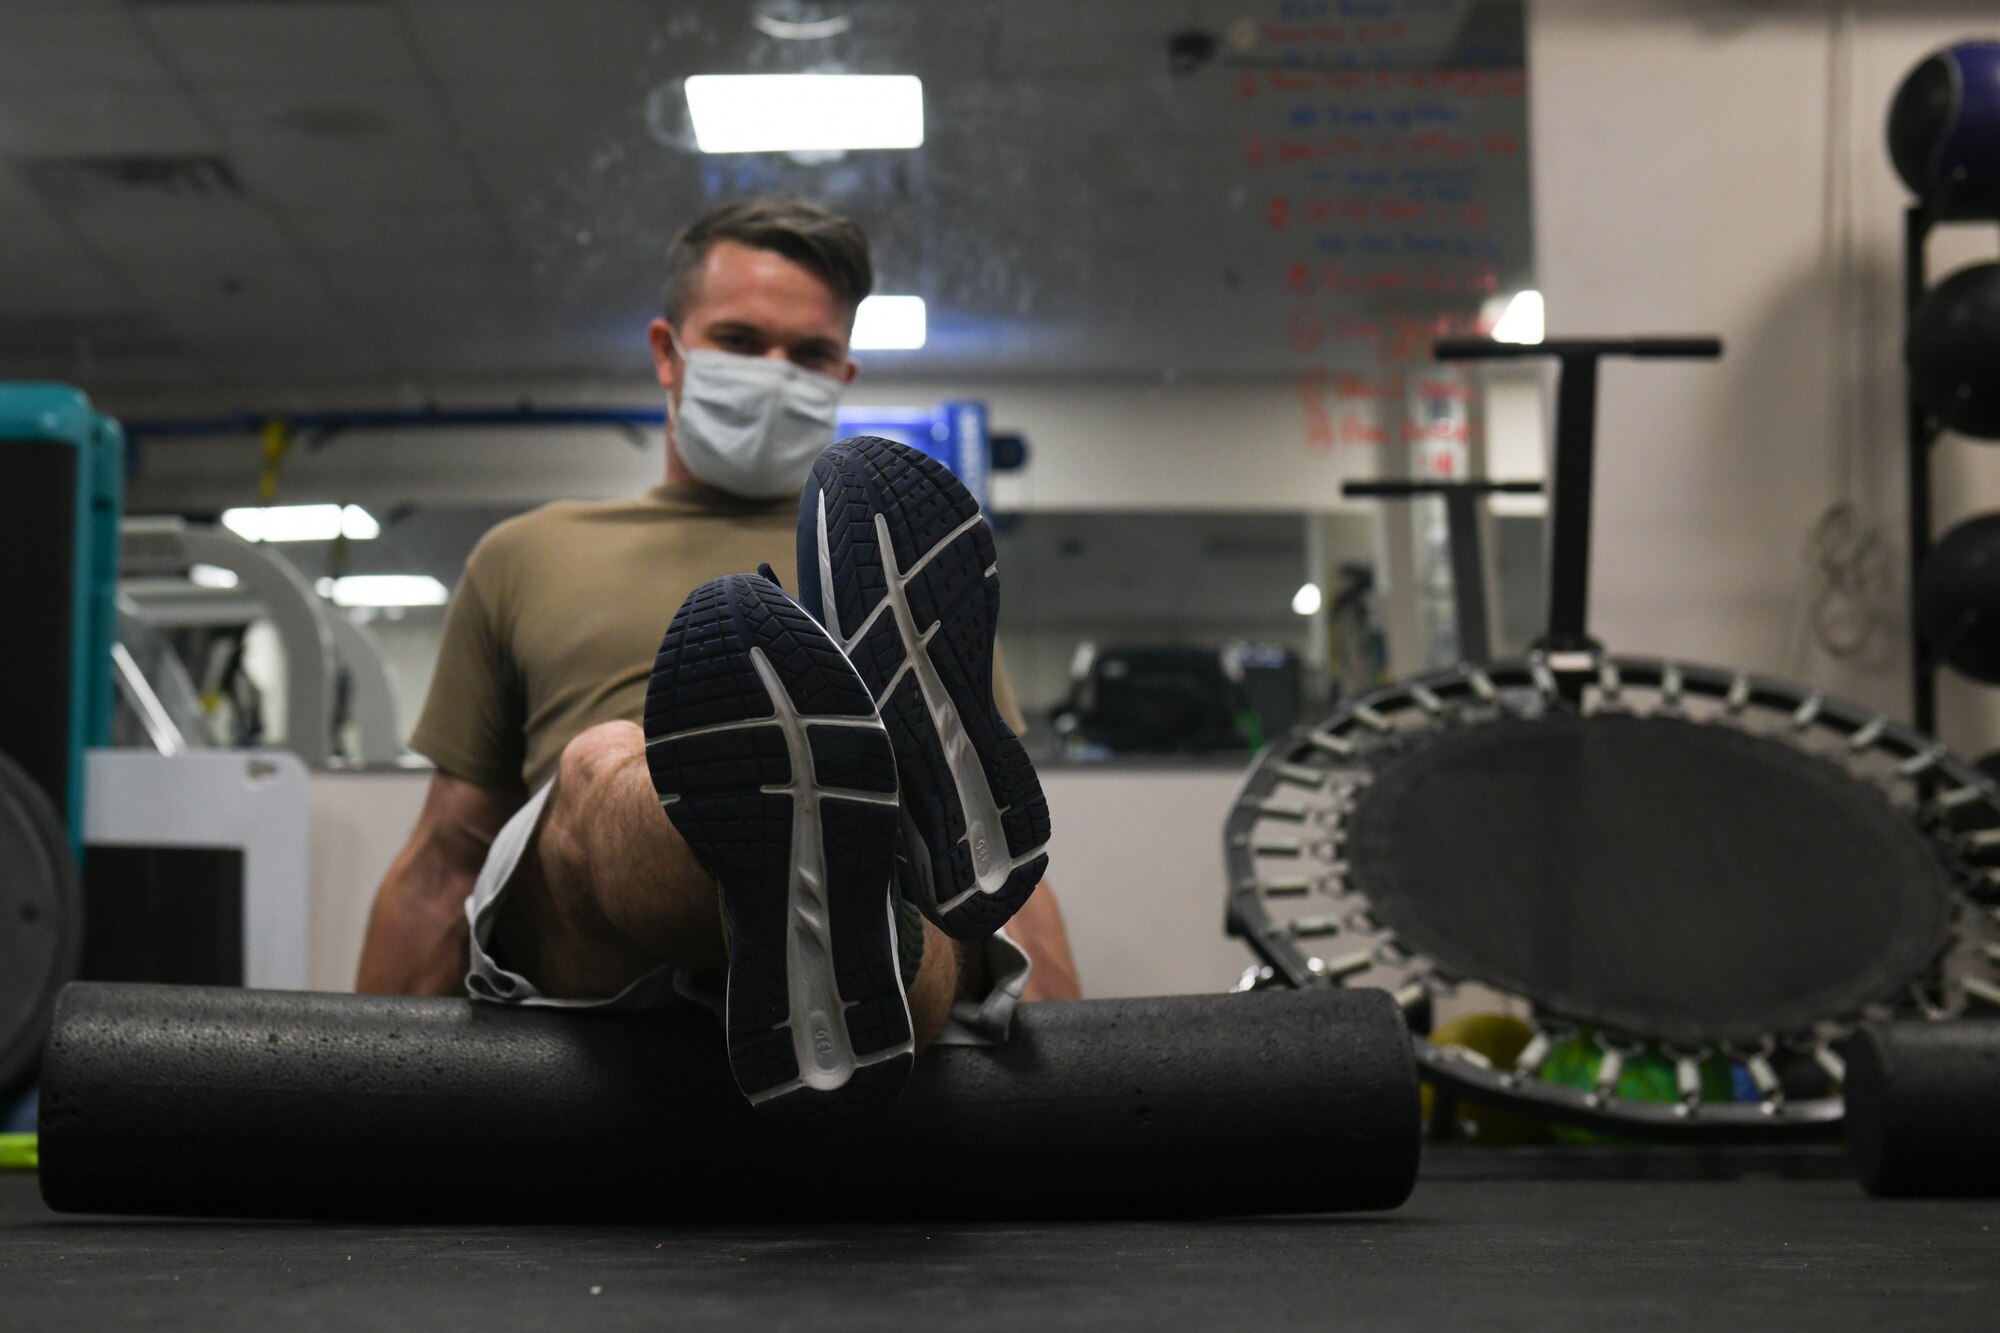 Tech. Sgt. David Ferricher, 22nd Maintenance Squadron metals technician, foam rolls his hamstrings Mar. 3, 2021, at McConnell Air Force Base, Kansas. The benefits of foam rolling include enhanced joint range of motion, delayed onset of fatigue and accelerated post recovery. (U.S. Air Force photo by Senior Airman Nilsa Garcia)